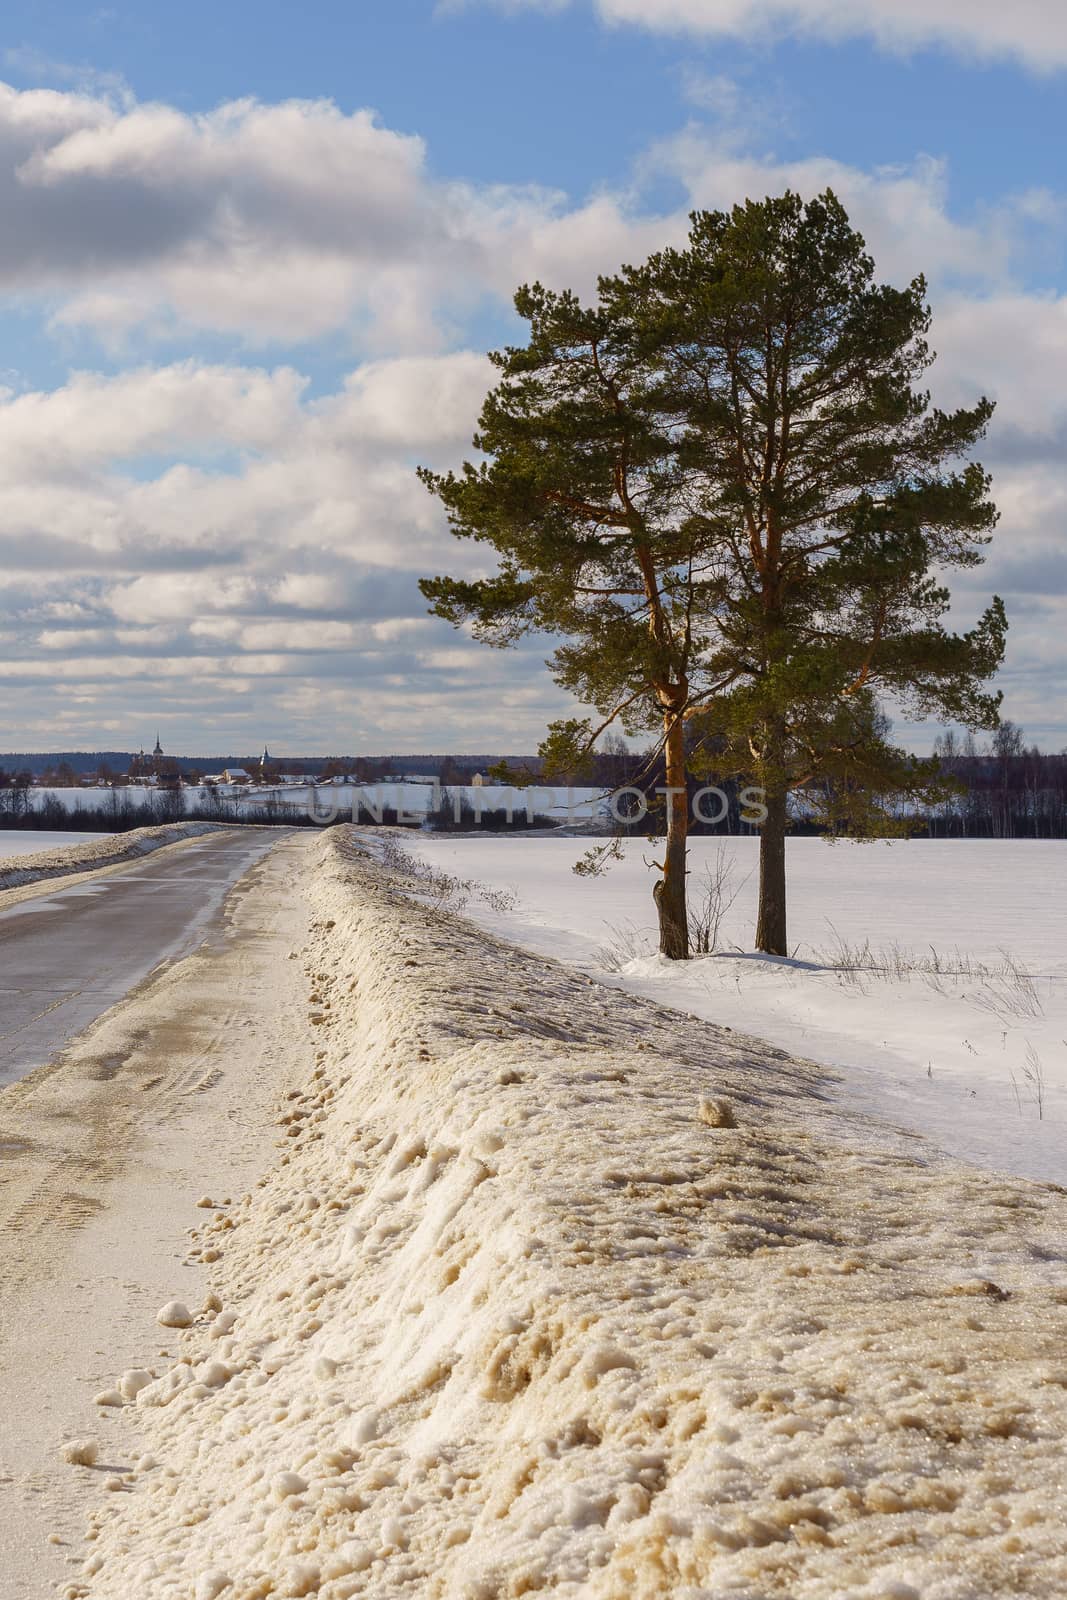 two pines near the road going through a snowy field by VADIM